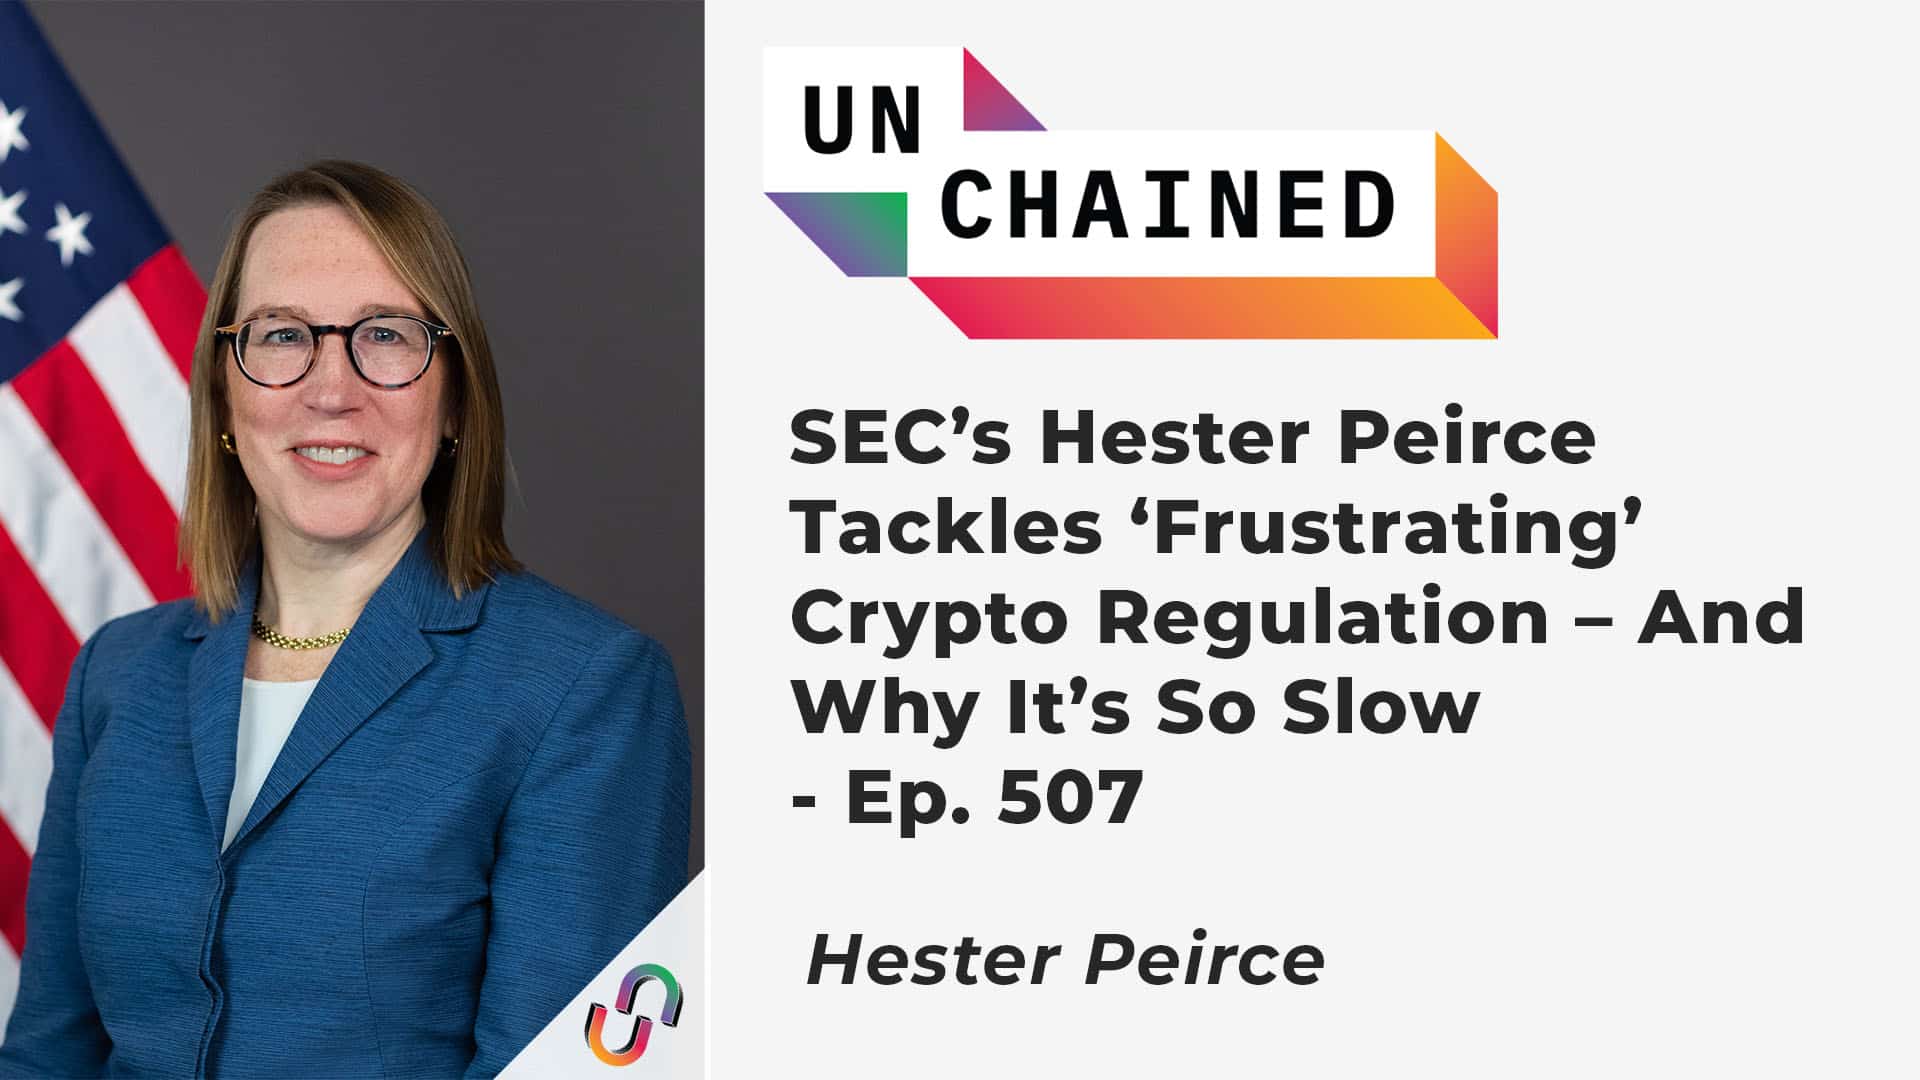 SEC’s Hester Peirce Tackles ‘Frustrating’ Crypto Regulation – And Why It’s So Slow - Ep. 507